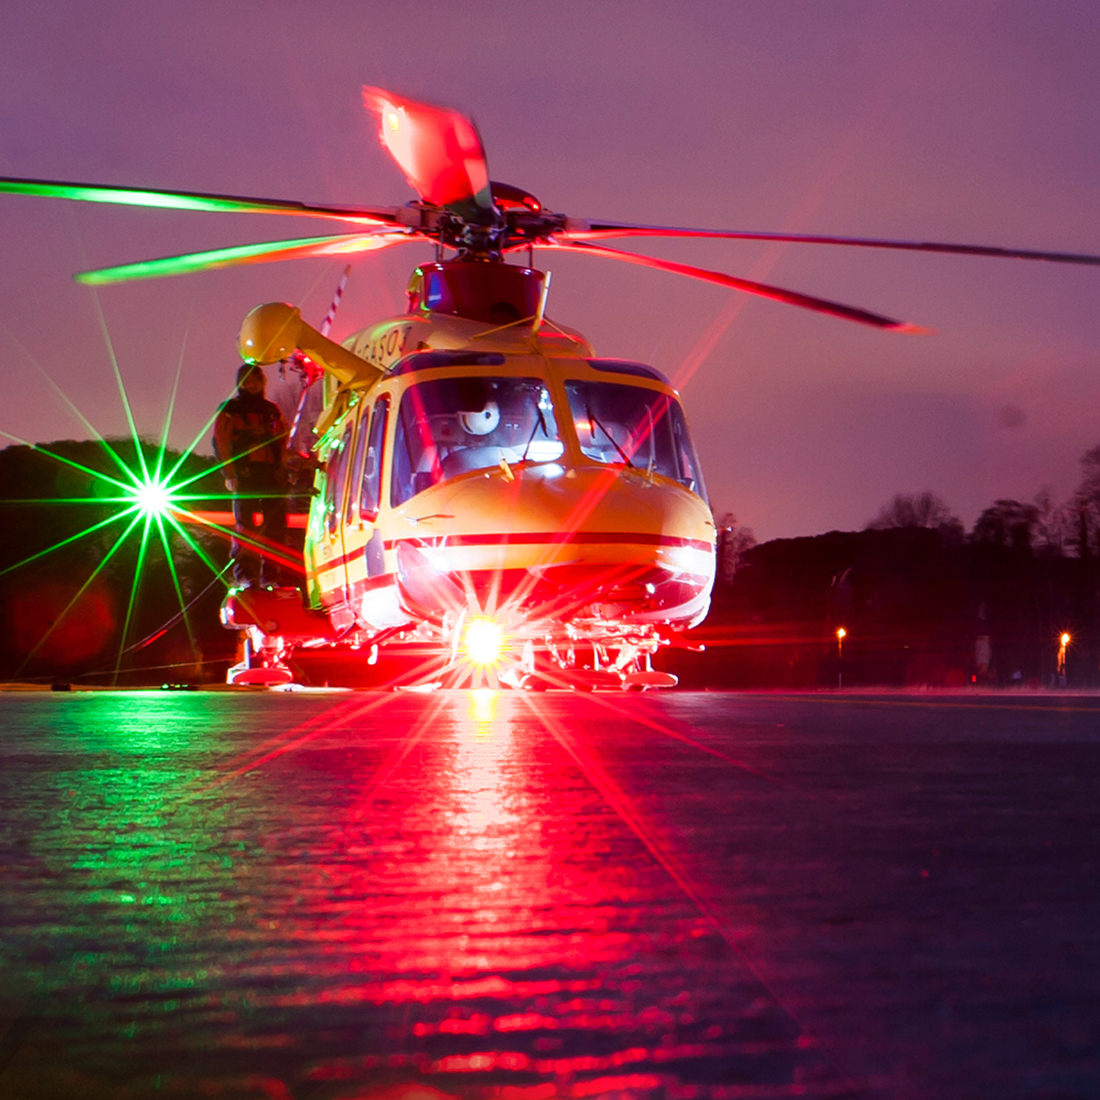 Image of emergency helicopter